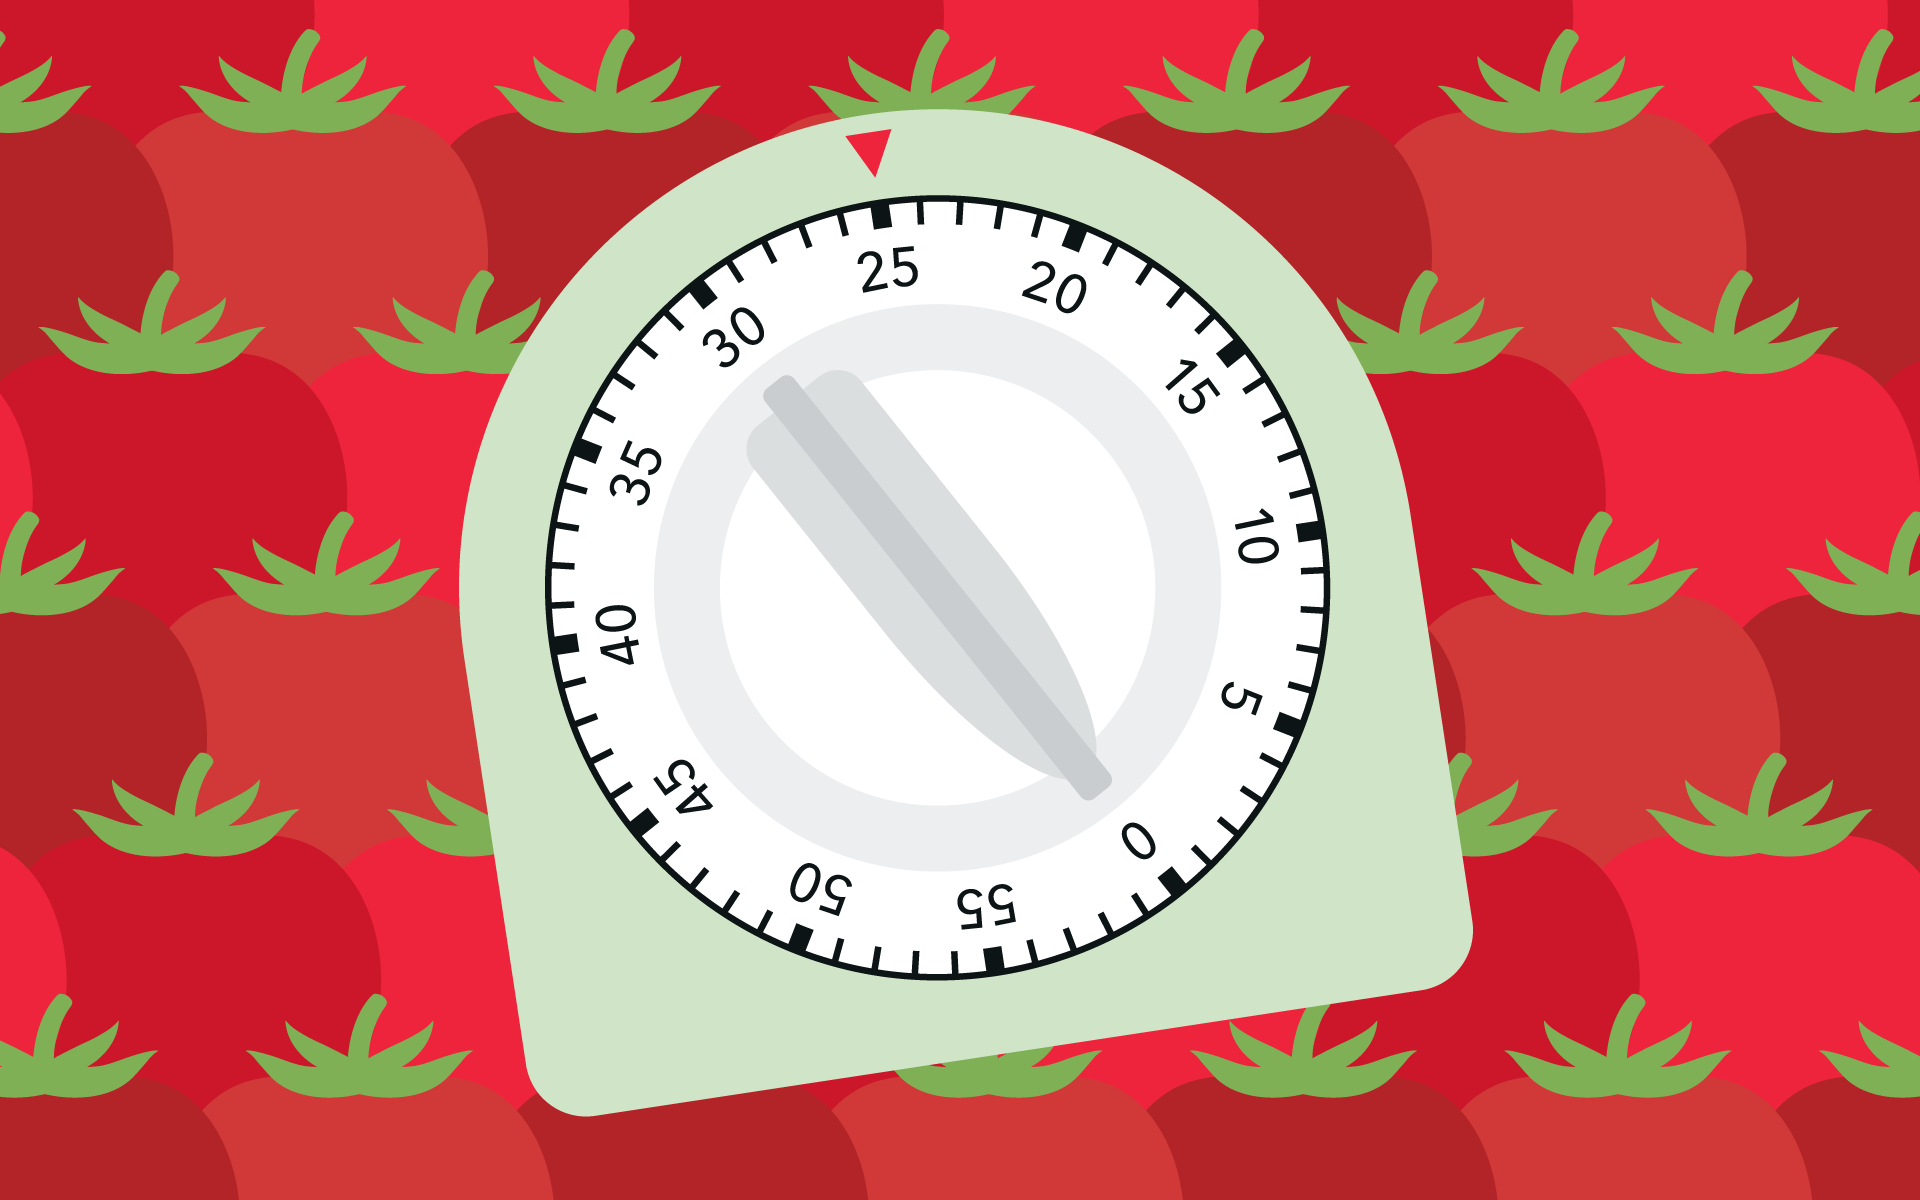 A kitchen timer set to 25 minutes with a backdrop of tomatoes.